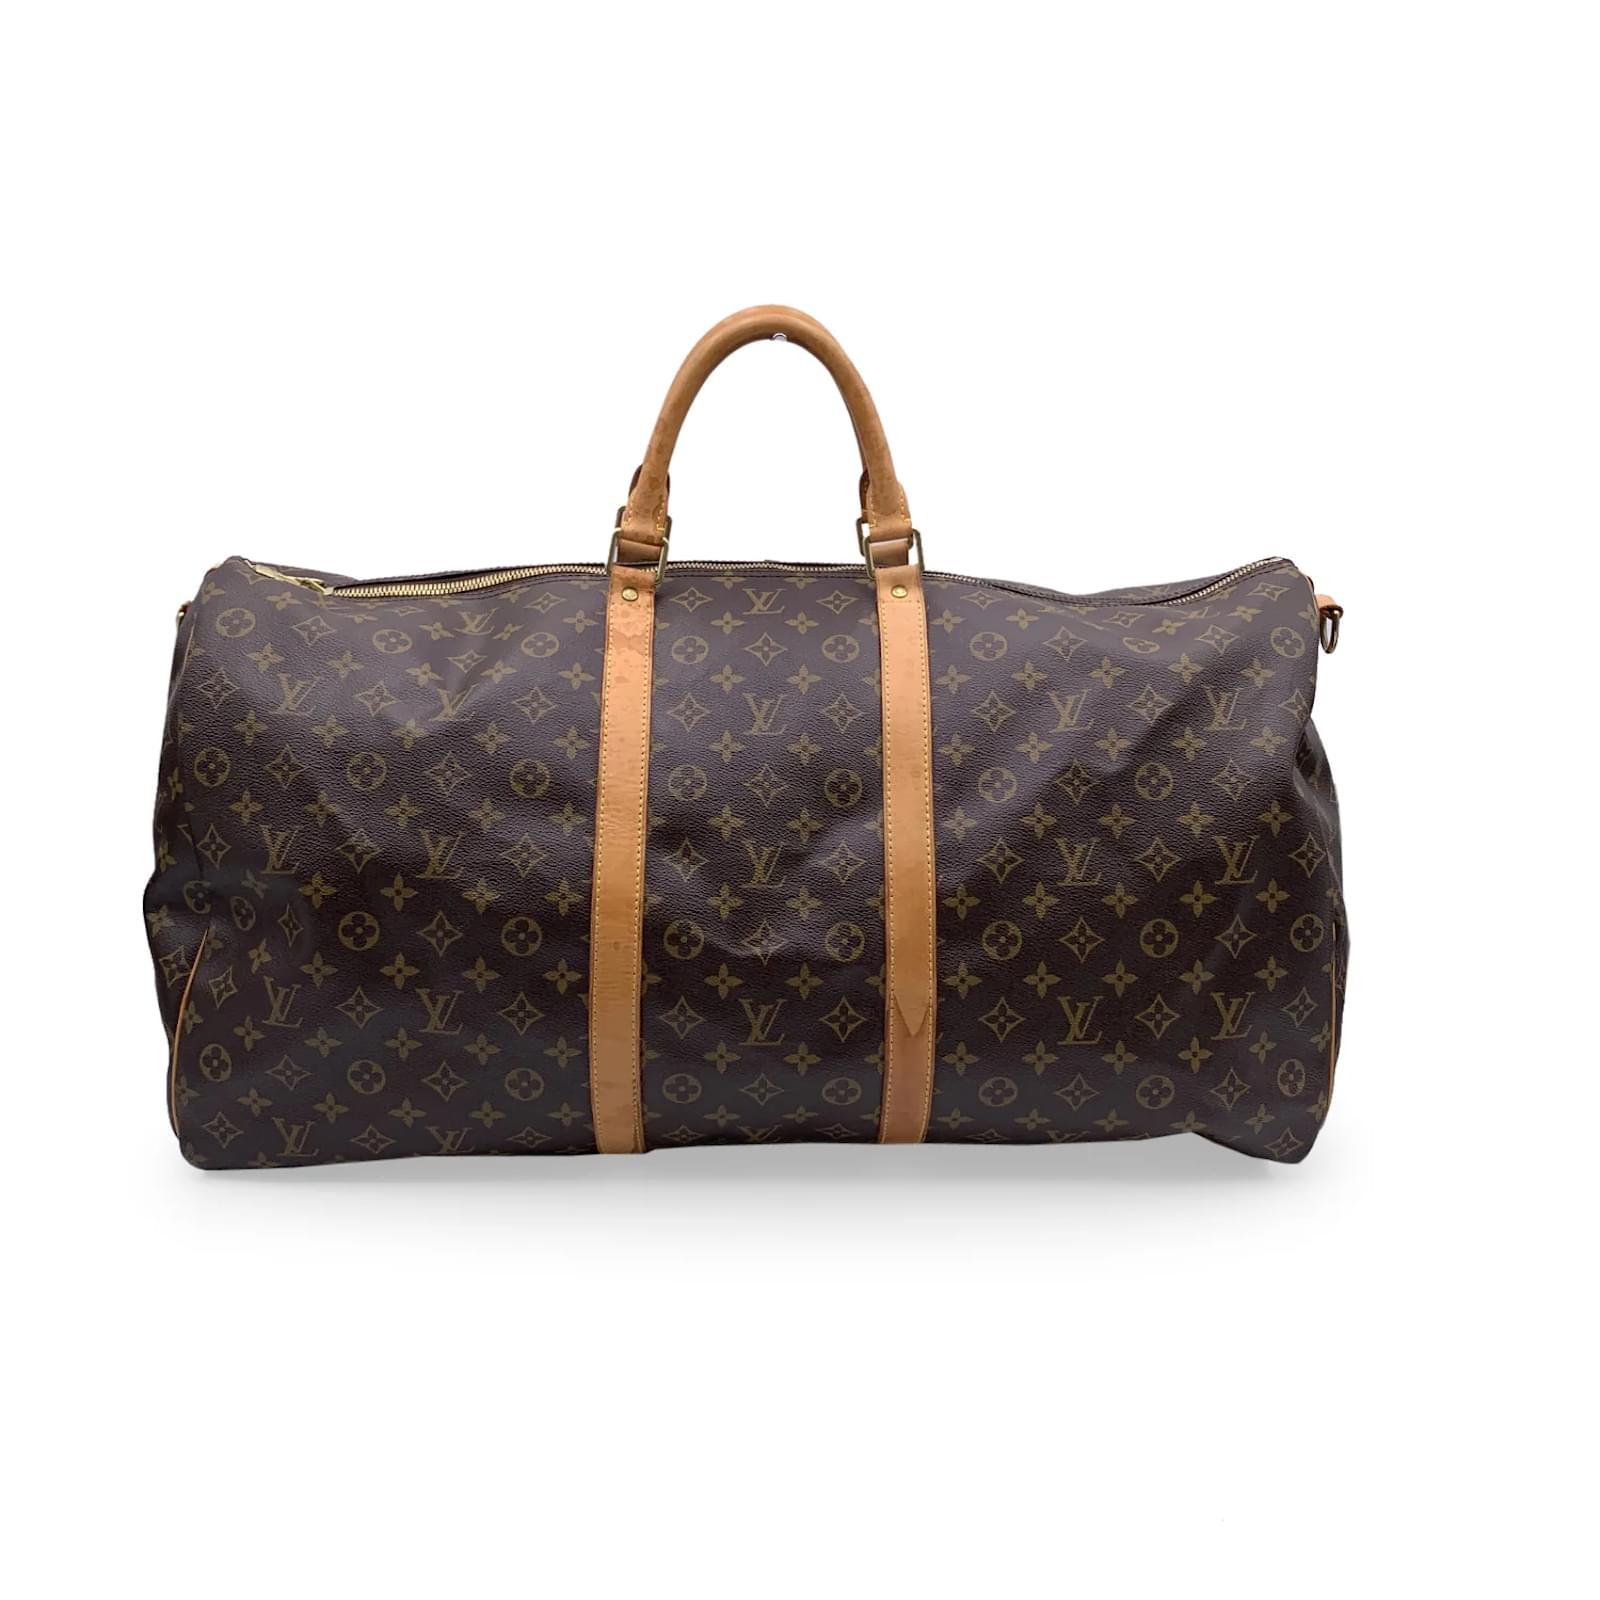 USED Louis Vuitton Black Epi Leather Keepall 55 Travel Duffle Bag AUTHENTIC